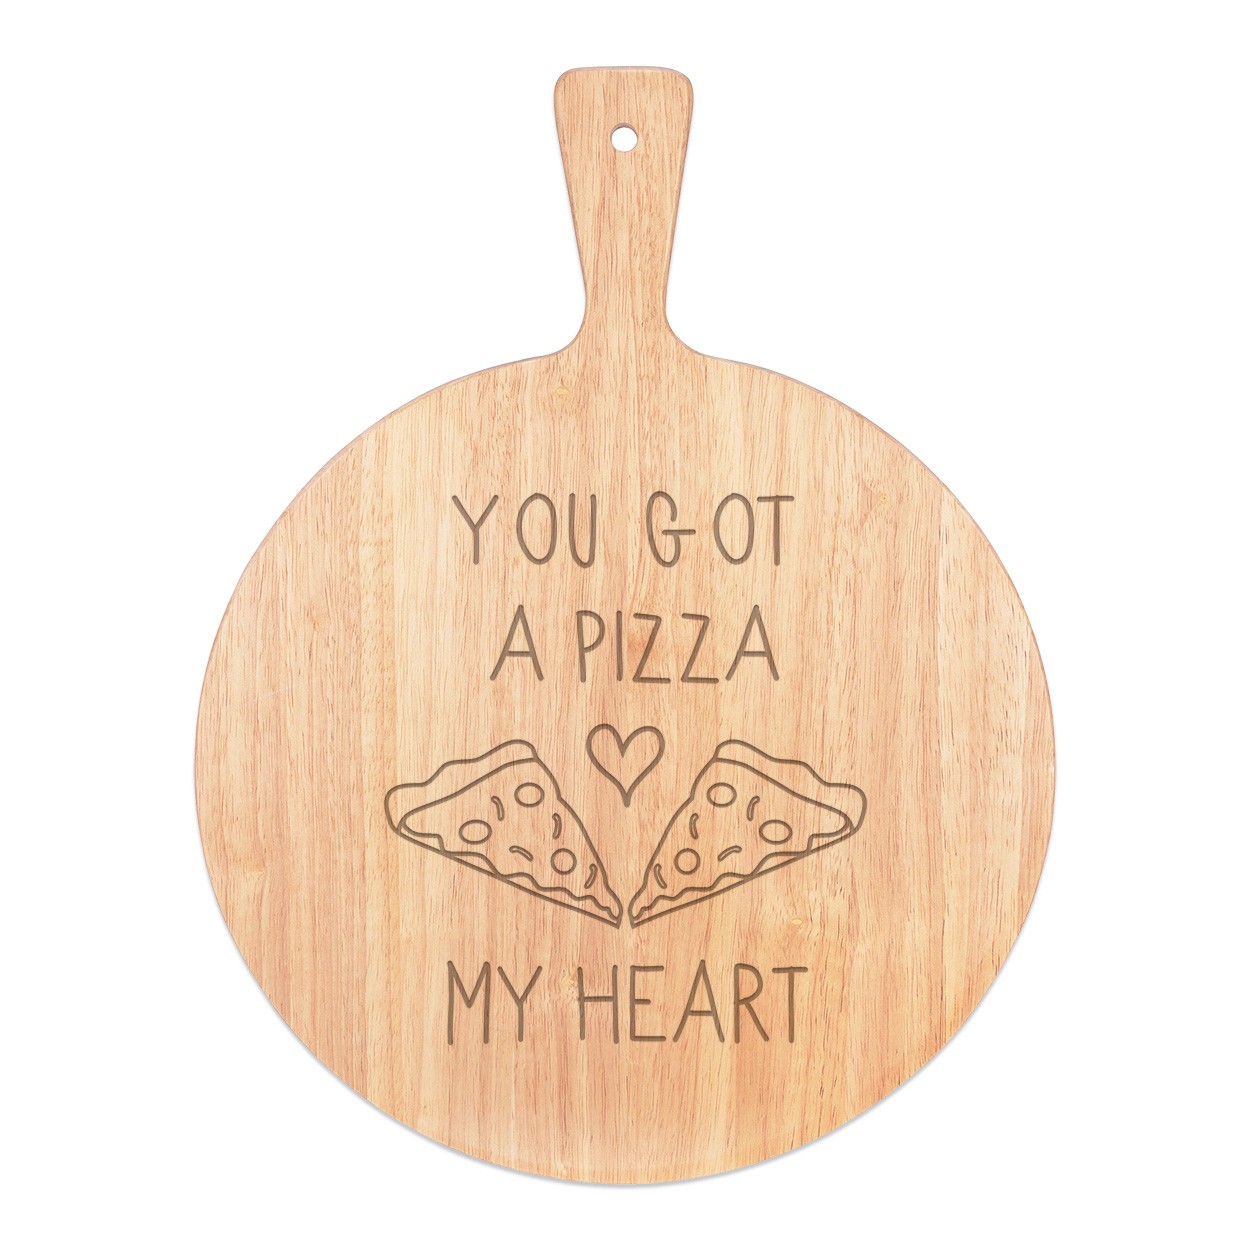 You Got A Pizza My Heart Pizza Board Paddle Serving Tray Handle Round Wooden 45x34cm